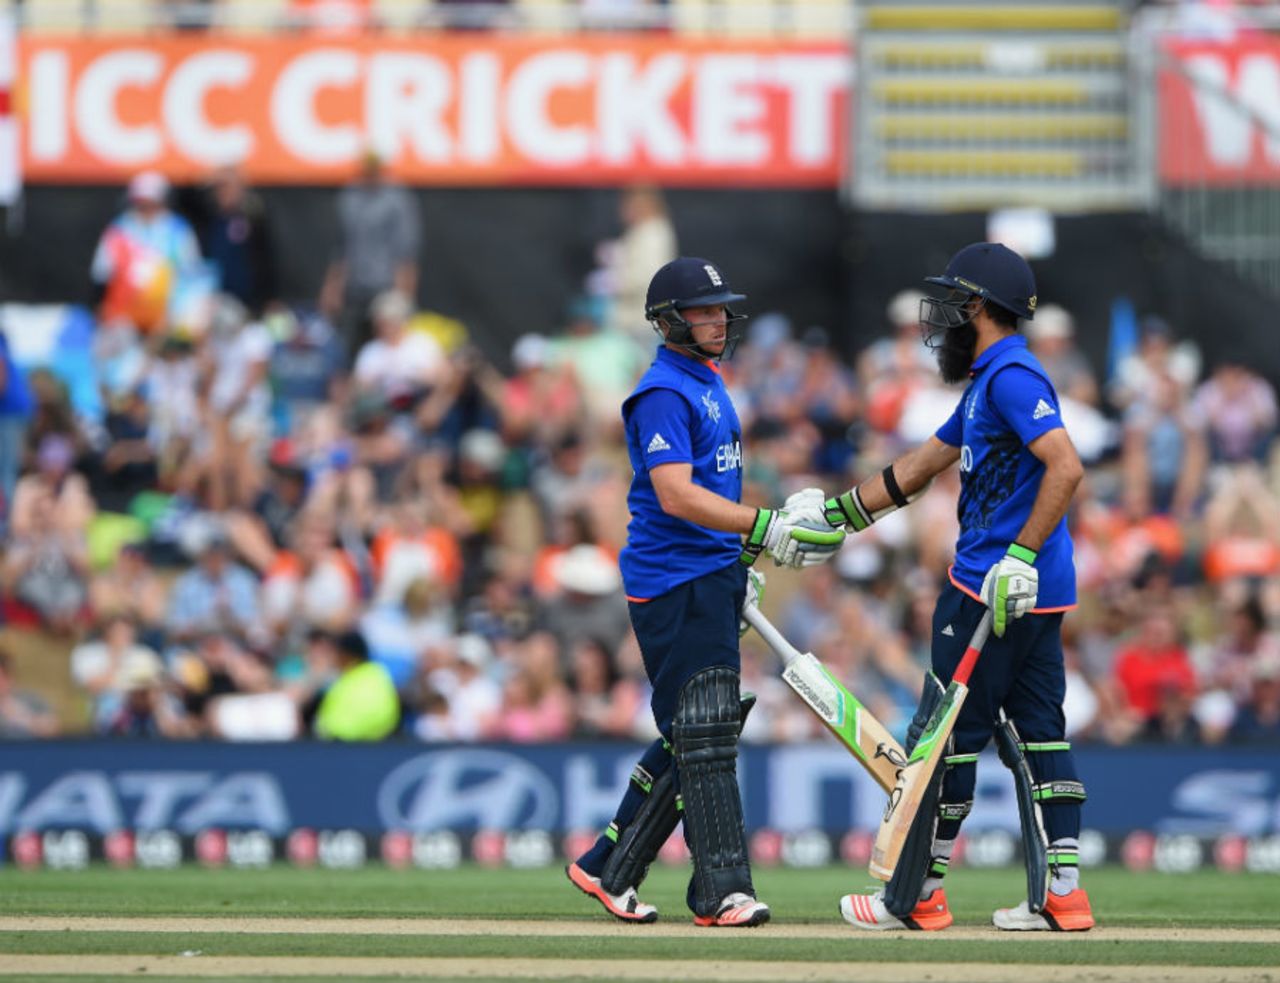 Moeen Ali was the aggressor in the opening partnership, England v Scotland, World Cup 2015, Group A, Christchurch, February 23, 2015